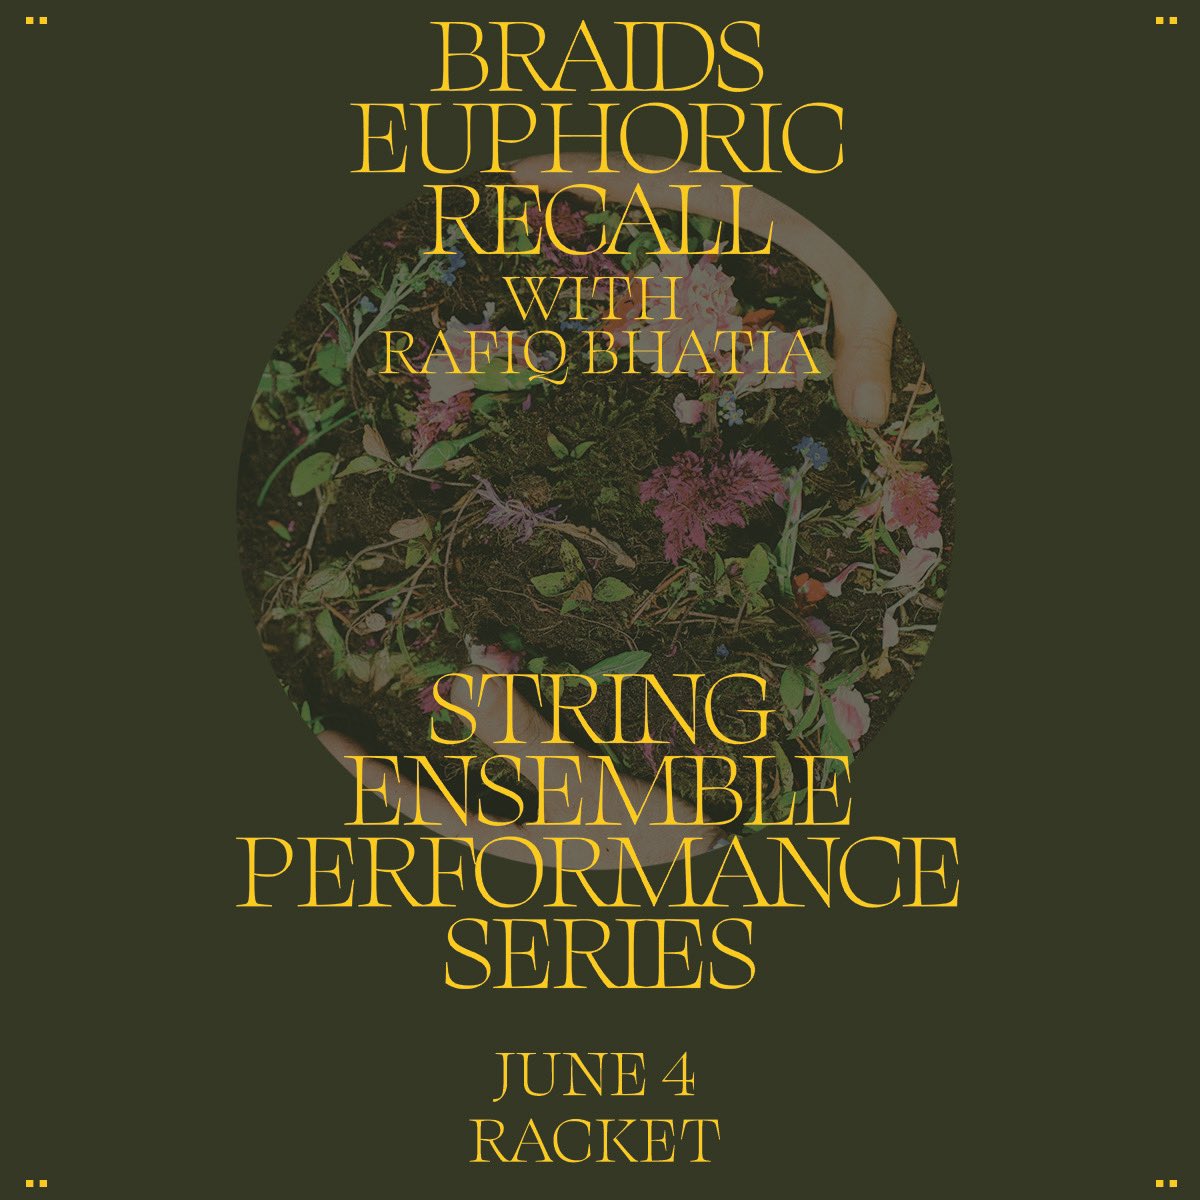 JUST ADDED: @rafiqbhatia joins @braidsmusic at Racket on June 4 🎻 join us for a very special performance featuring a string ensemble and immersive visuals, won’t ya? ➡️ tbp.im/427wP1E